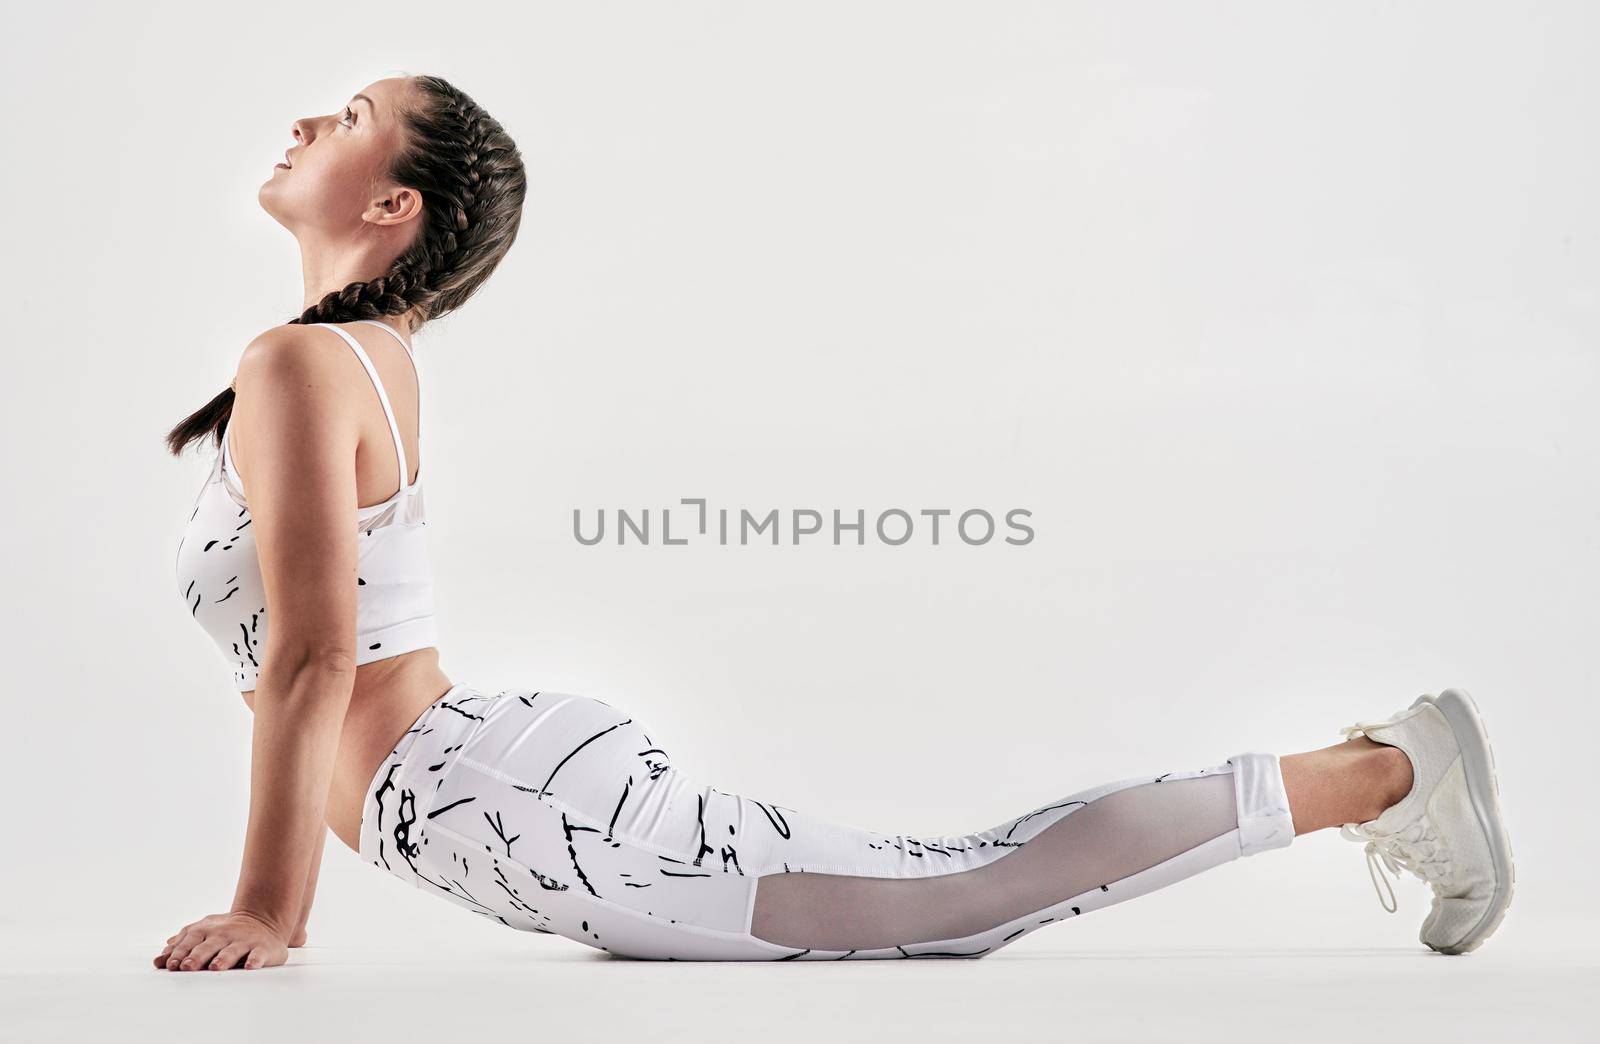 You dream, you plan, you reach. Studio shot of a sporty young woman exercising against a white background